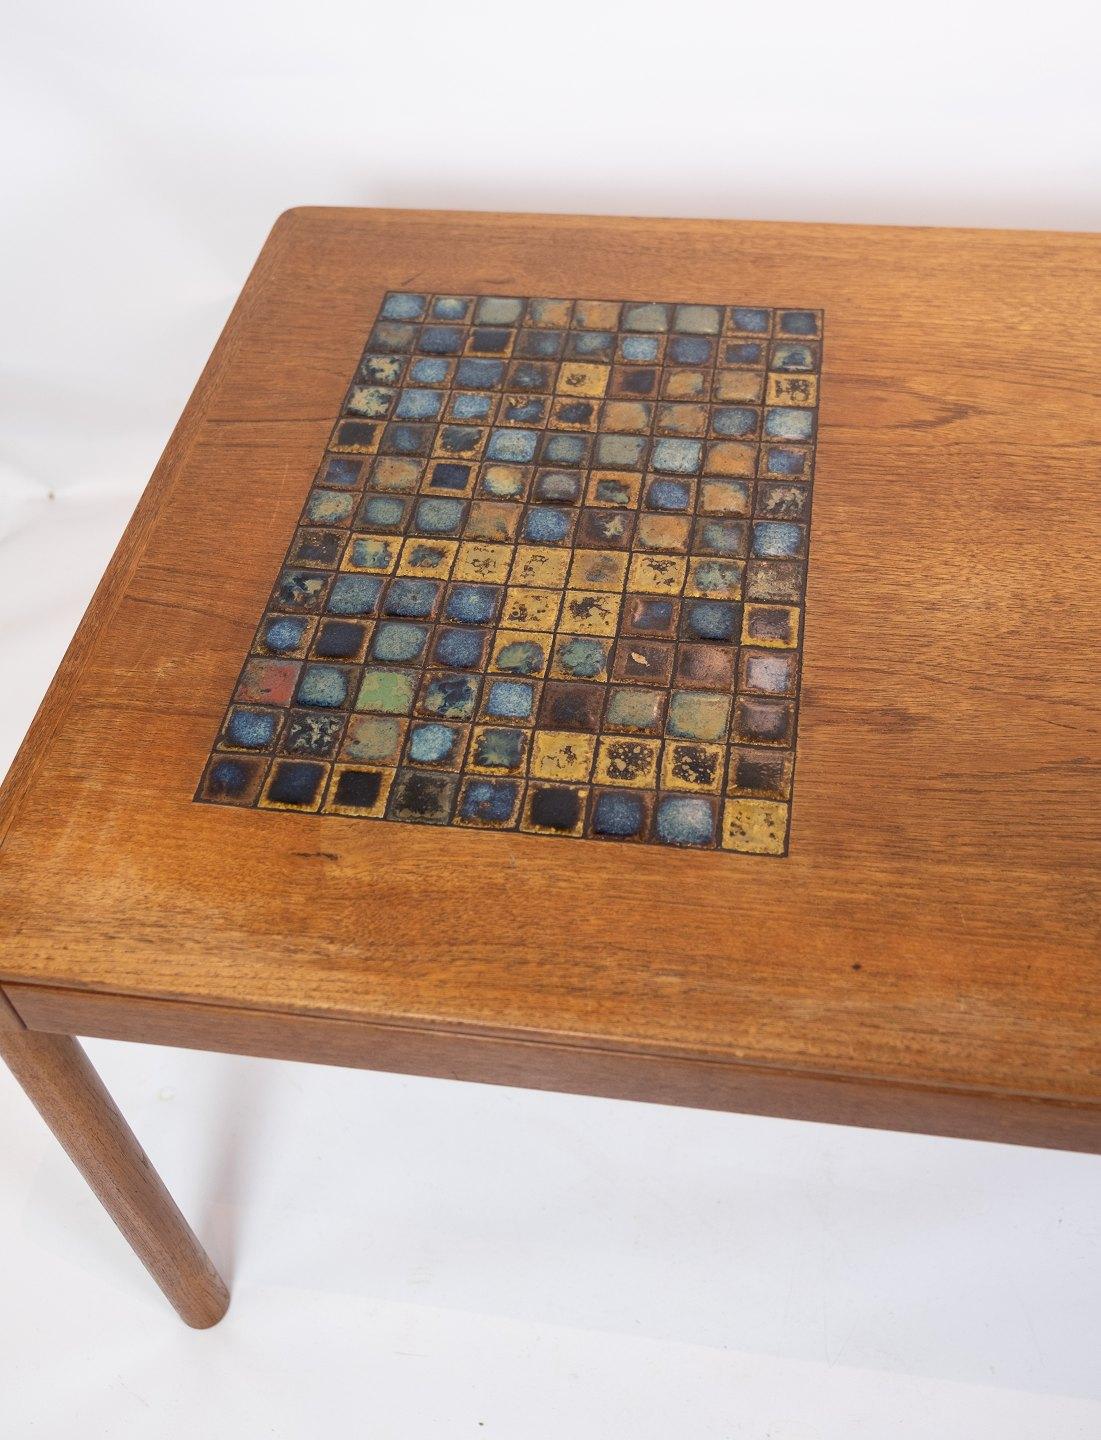 Scandinavian Modern Coffee Table in Teak with Brown Ceramic Tiles of Danish Design from the 1960s For Sale